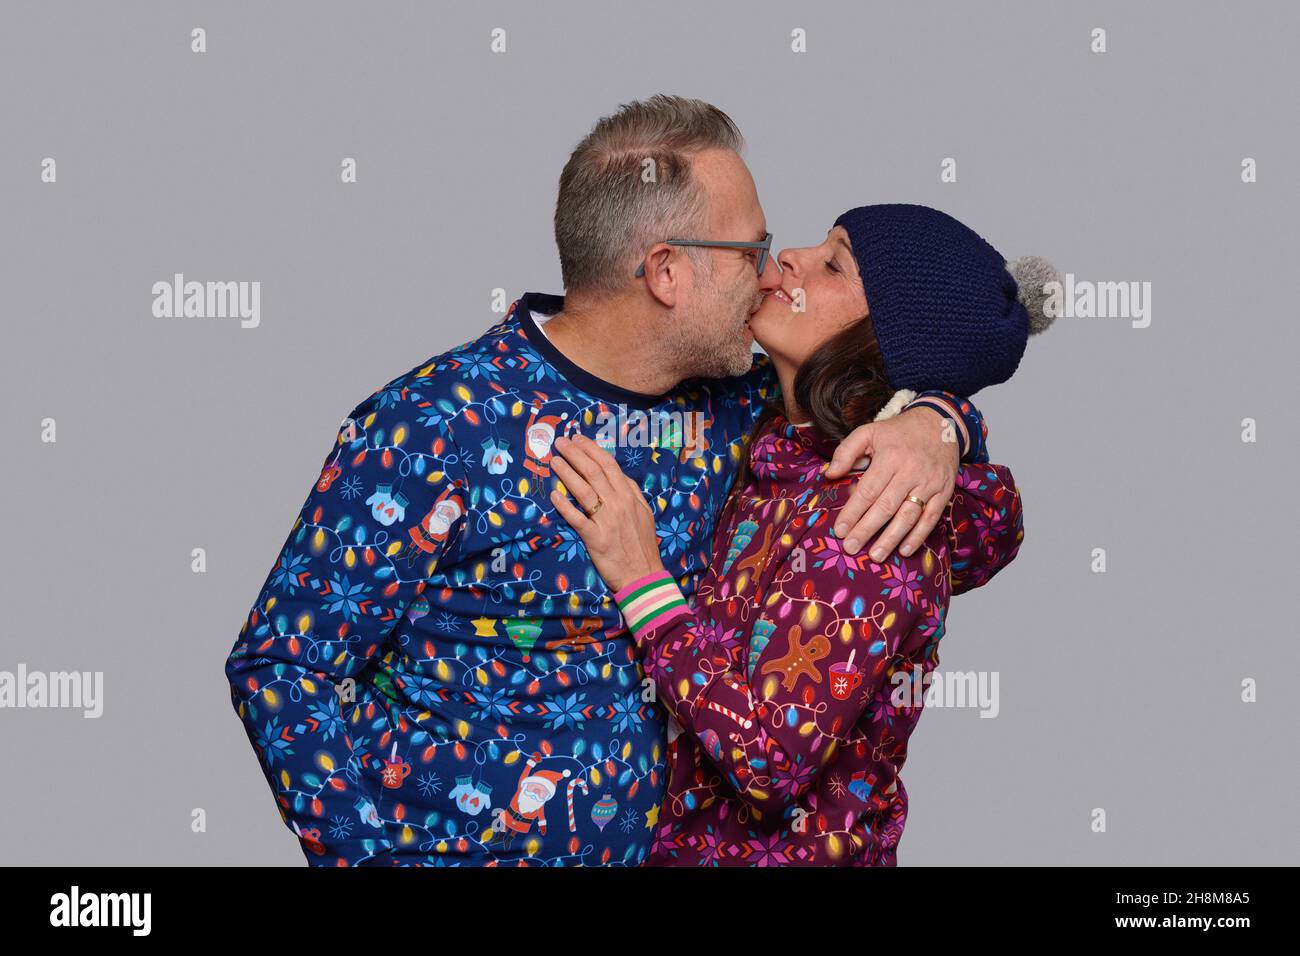 Happy middle-aged couple kissing as they celebrate Christmas together dressed in colorful Xmas themed clothing posing in front of a grey wall Stock Photo